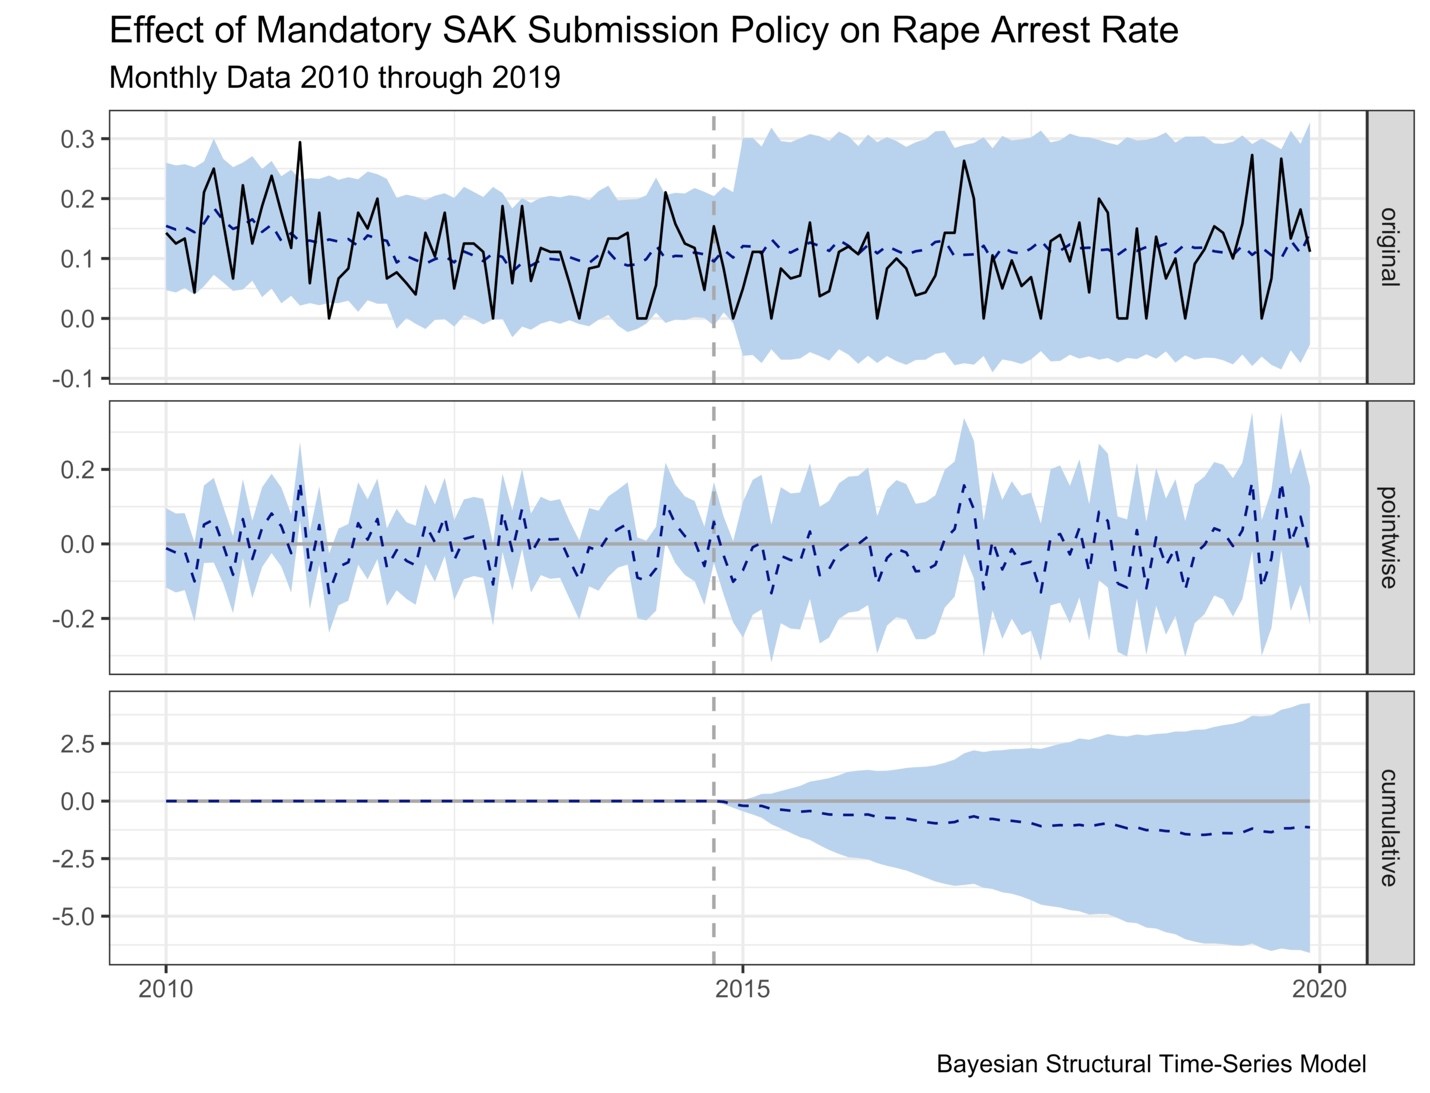 Effect of Mandatory SAK Submission Policy on Rape Arrest Rate, Monthly Data 2010 through 2019